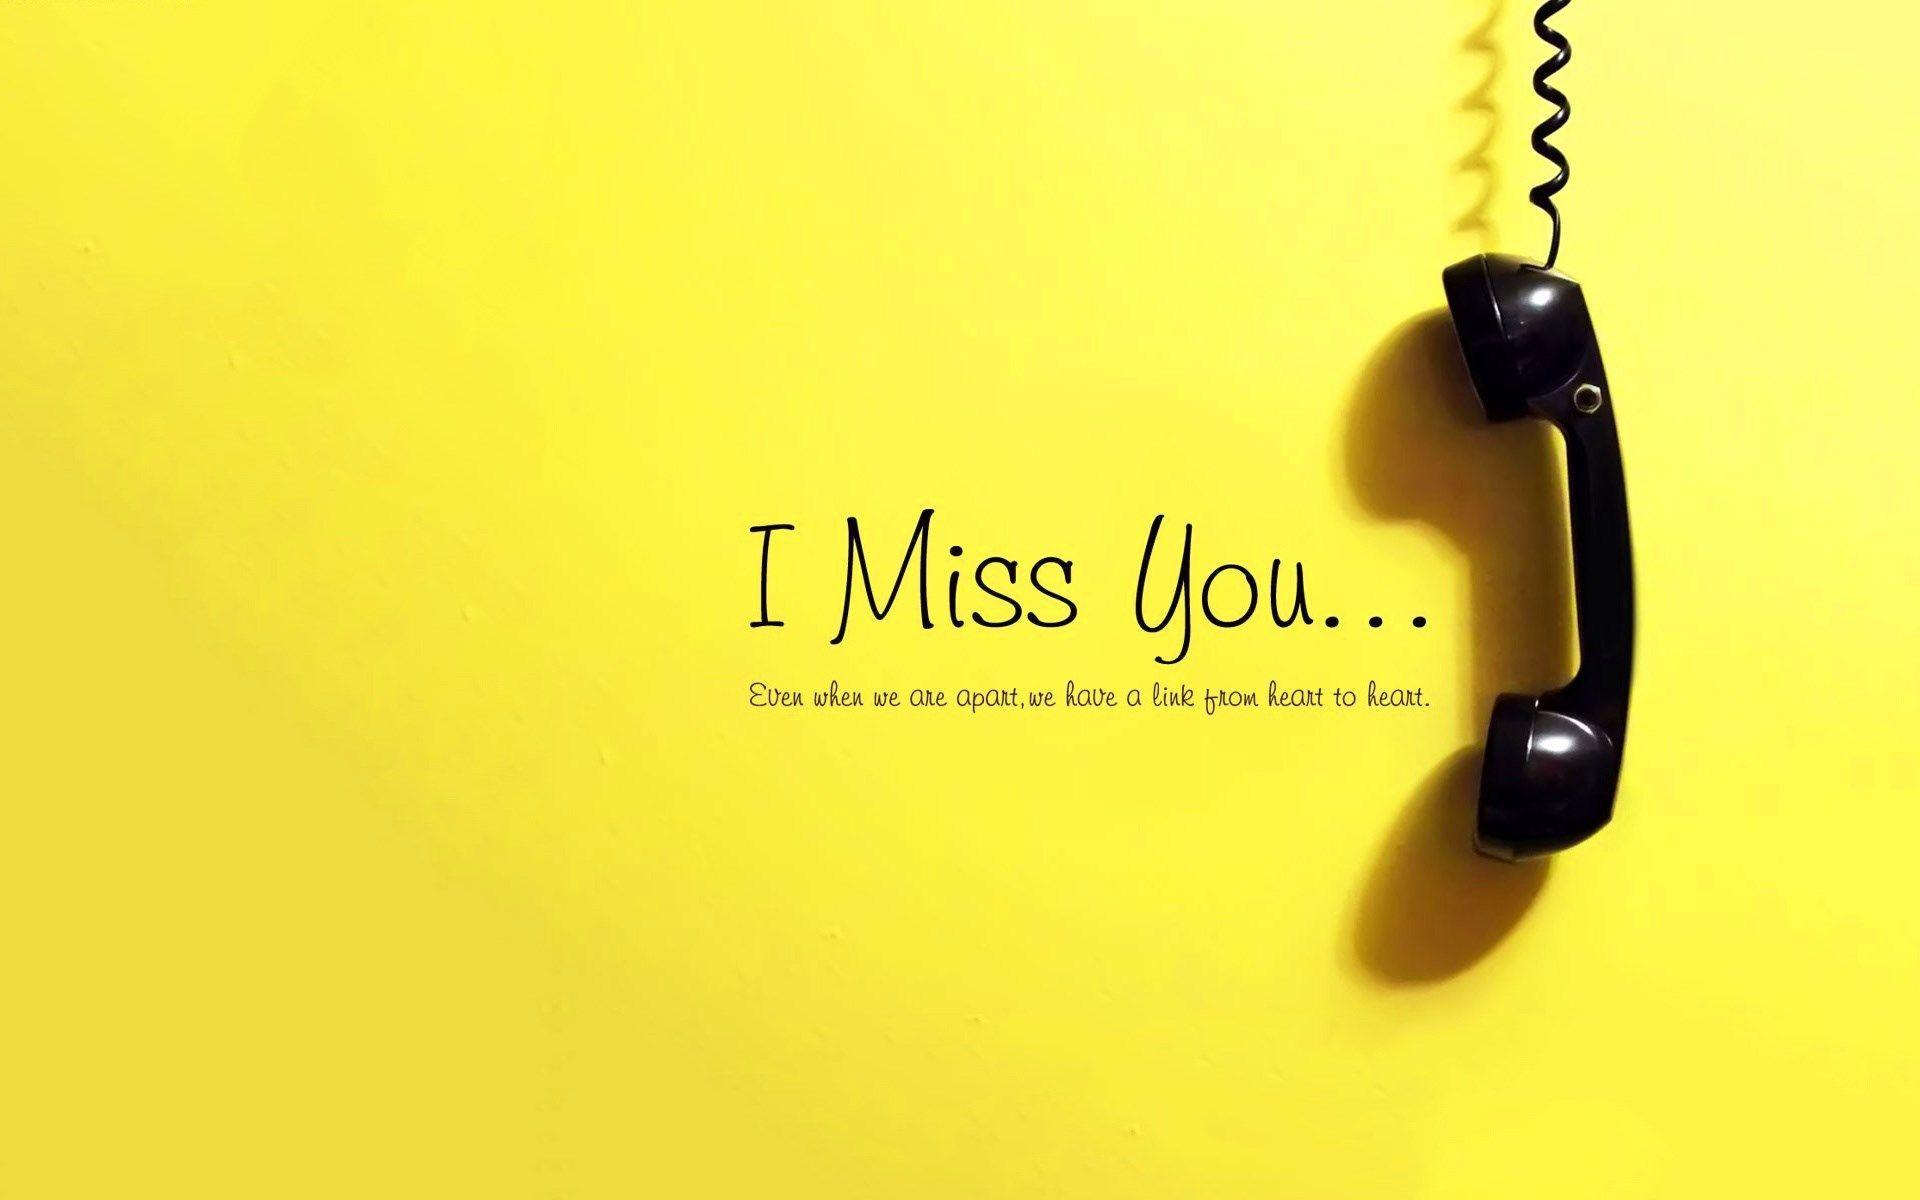 I miss you and wait for call wallpaper